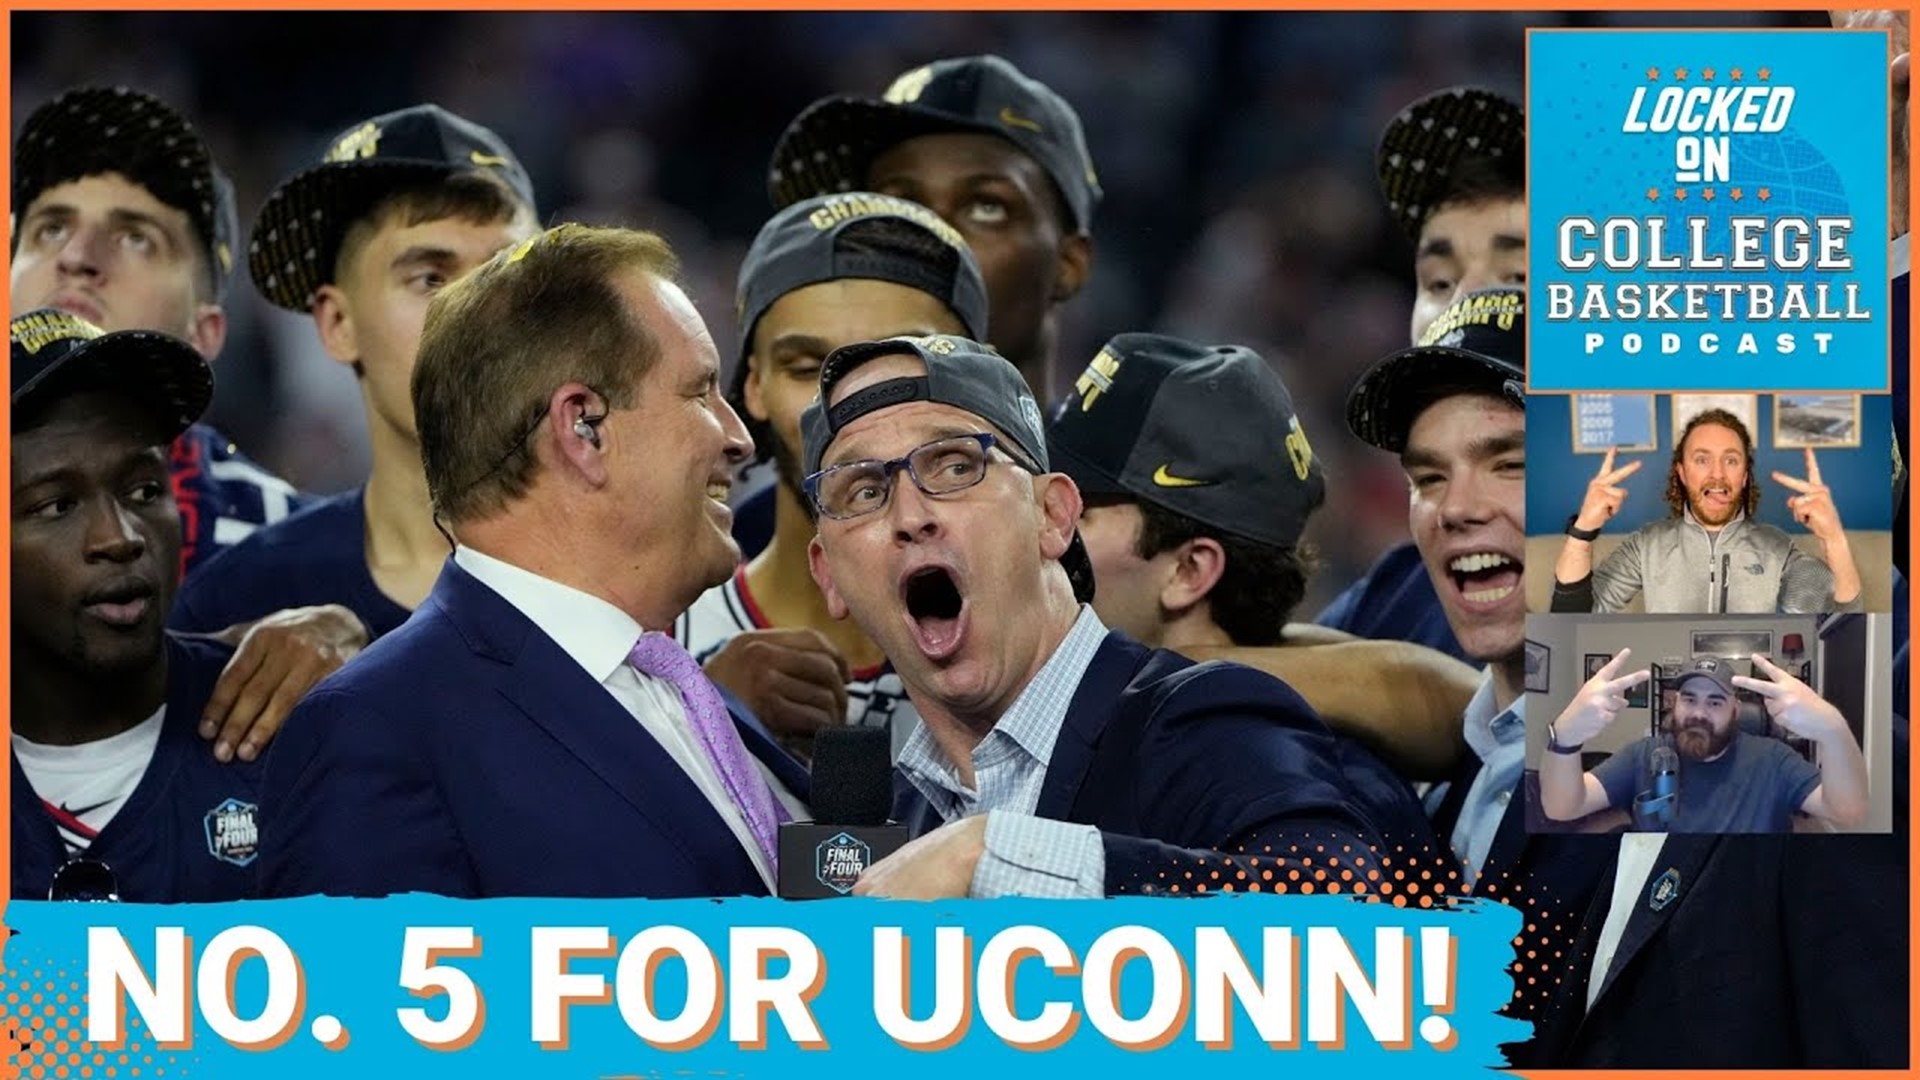 UConn just capped the first-ever NCAA Tournament run where the champion won all six games by 13 or more points.